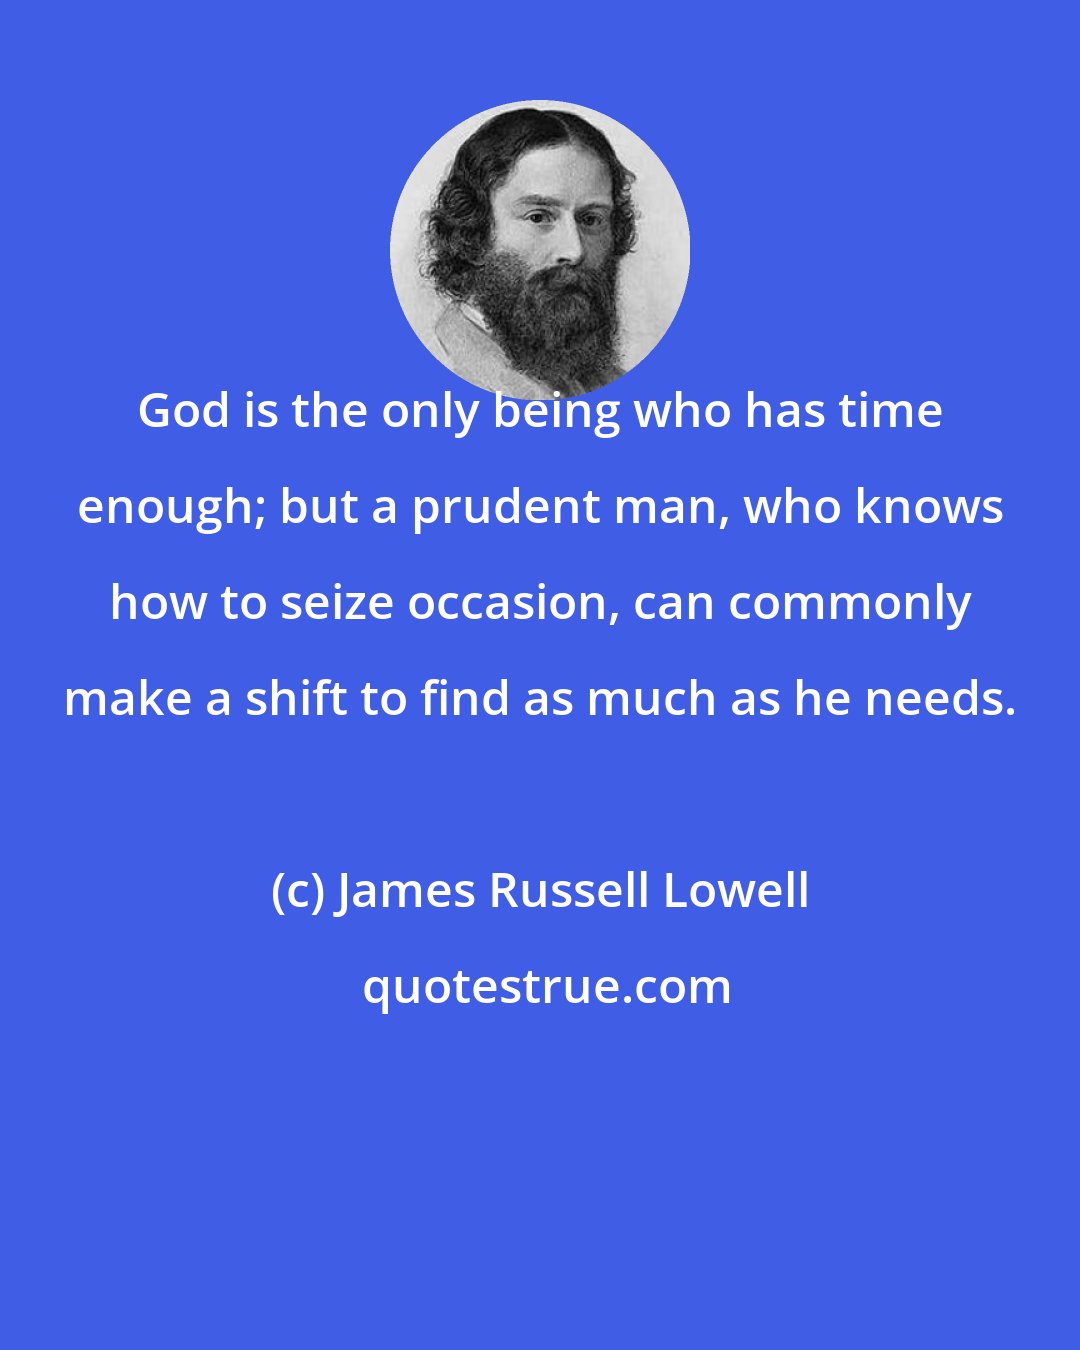 James Russell Lowell: God is the only being who has time enough; but a prudent man, who knows how to seize occasion, can commonly make a shift to find as much as he needs.